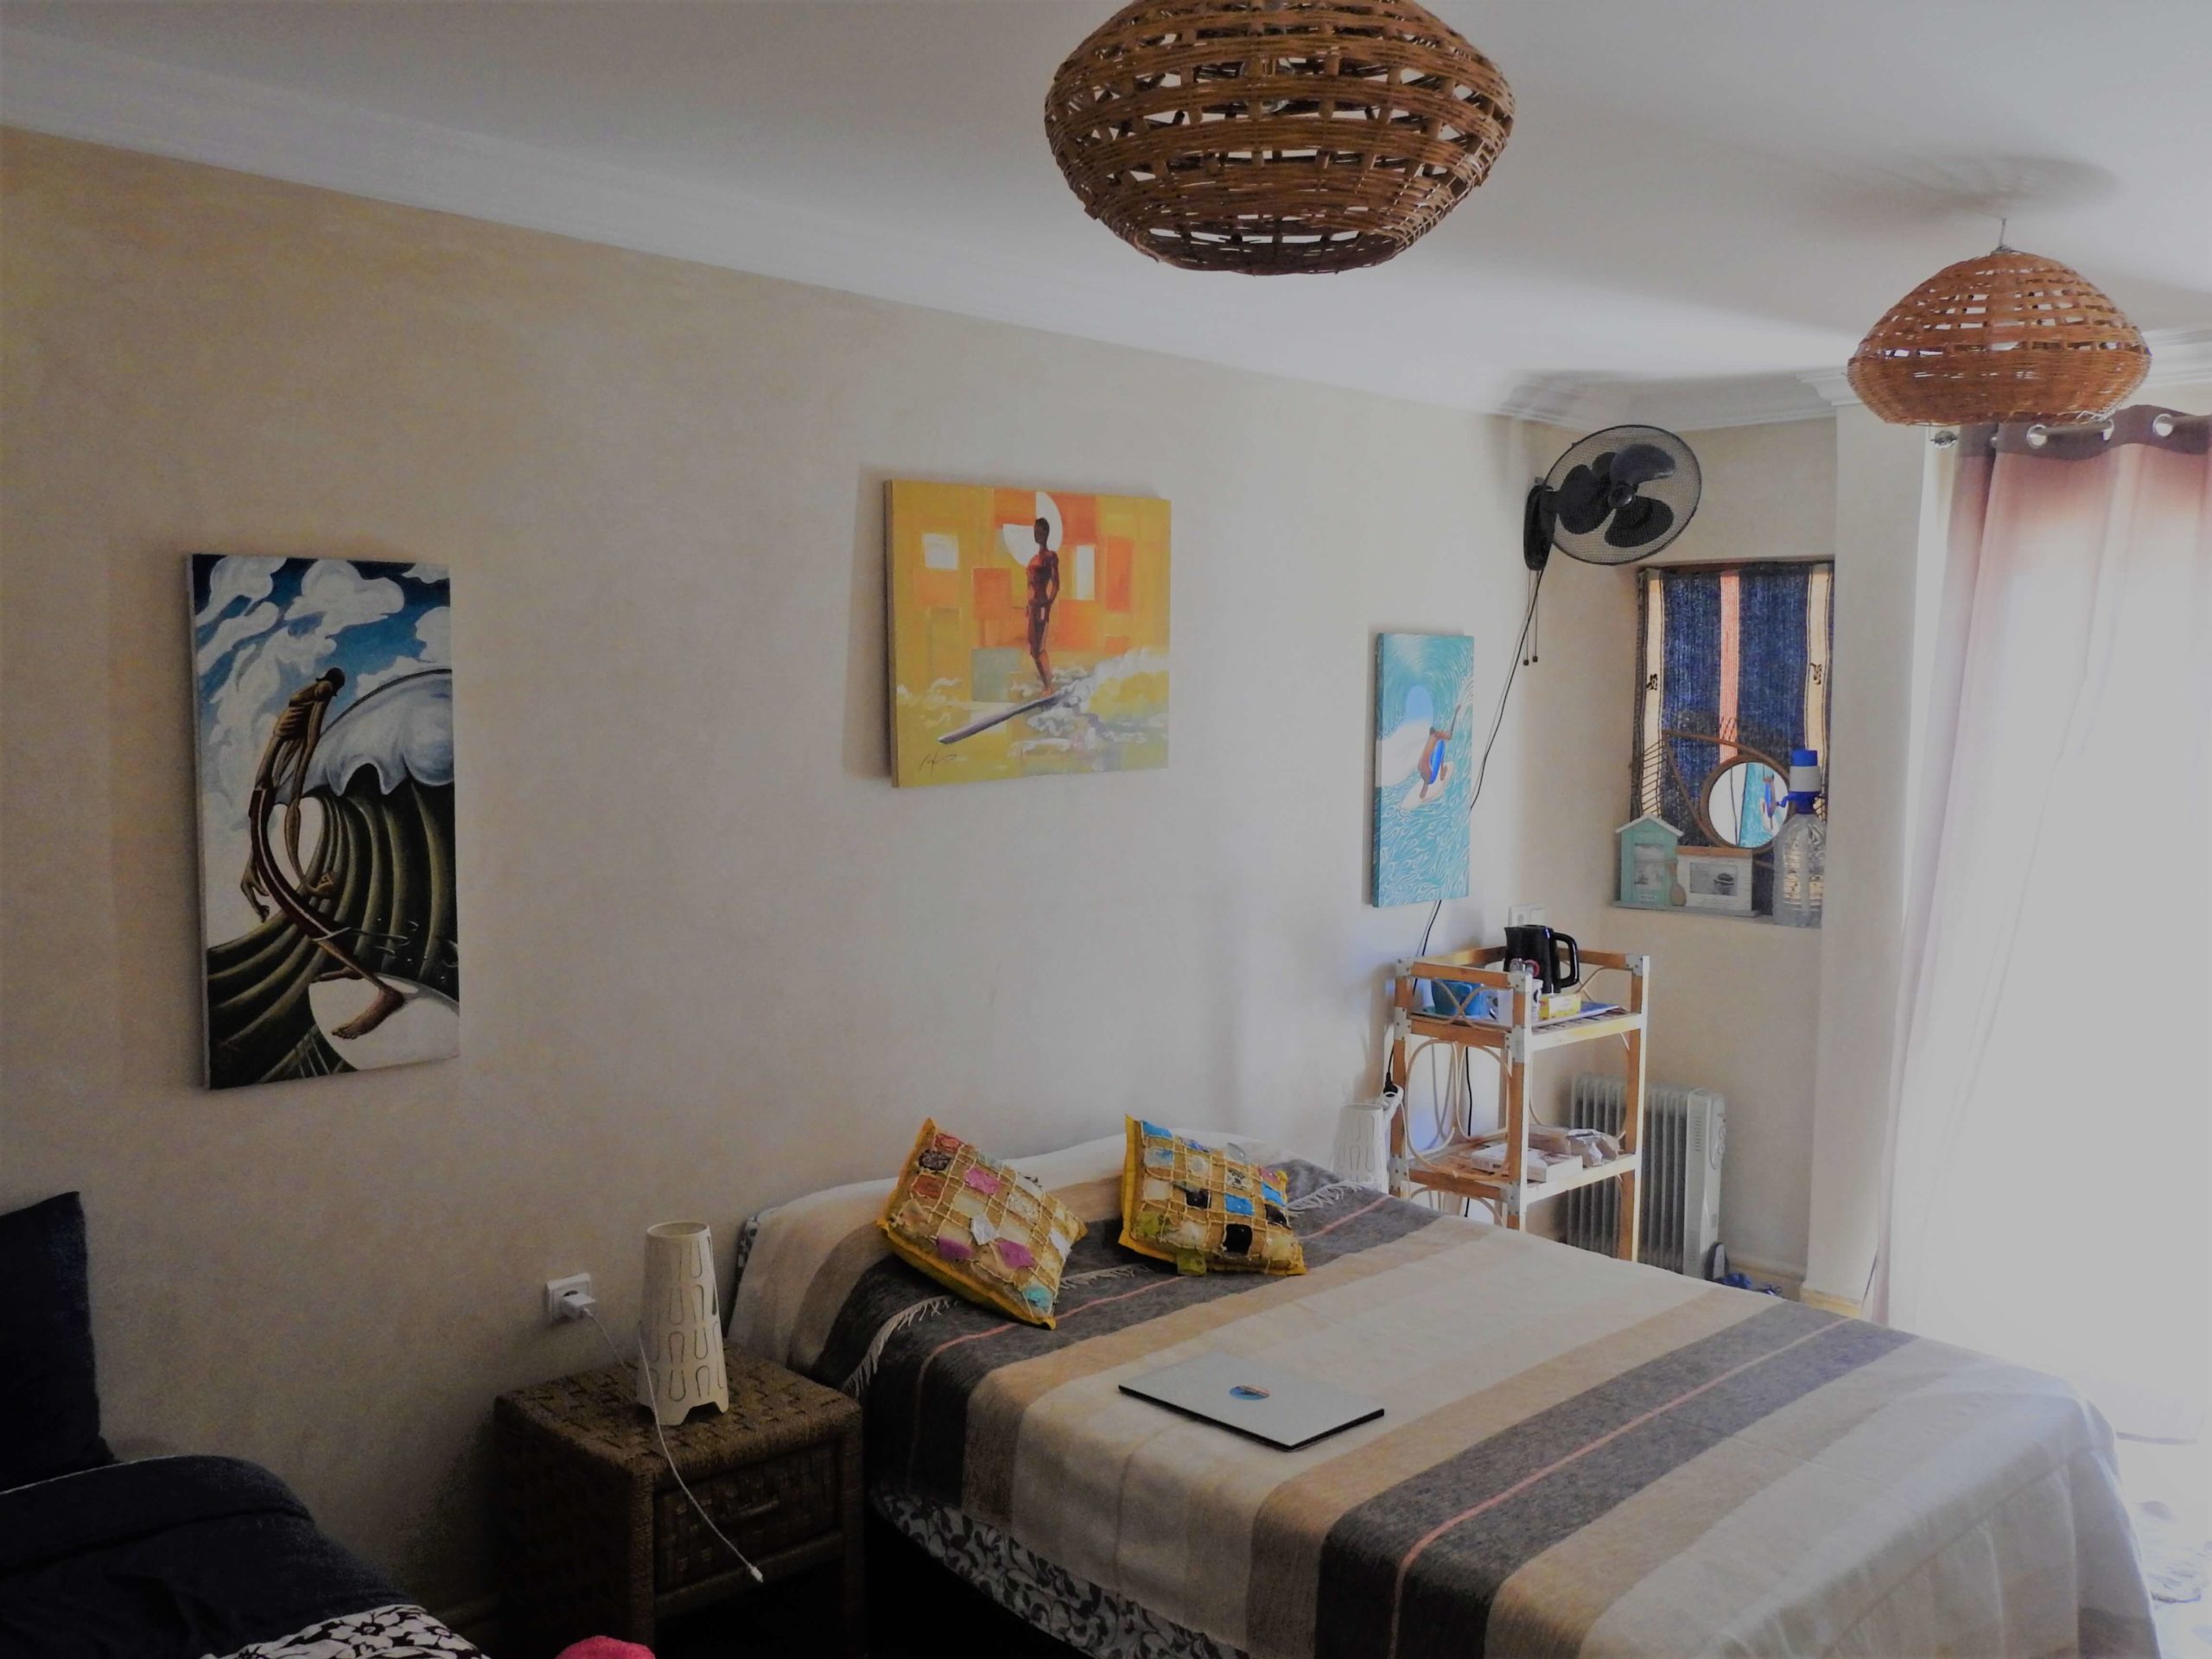 Chambres Individuelles - FREE SURF MAROC